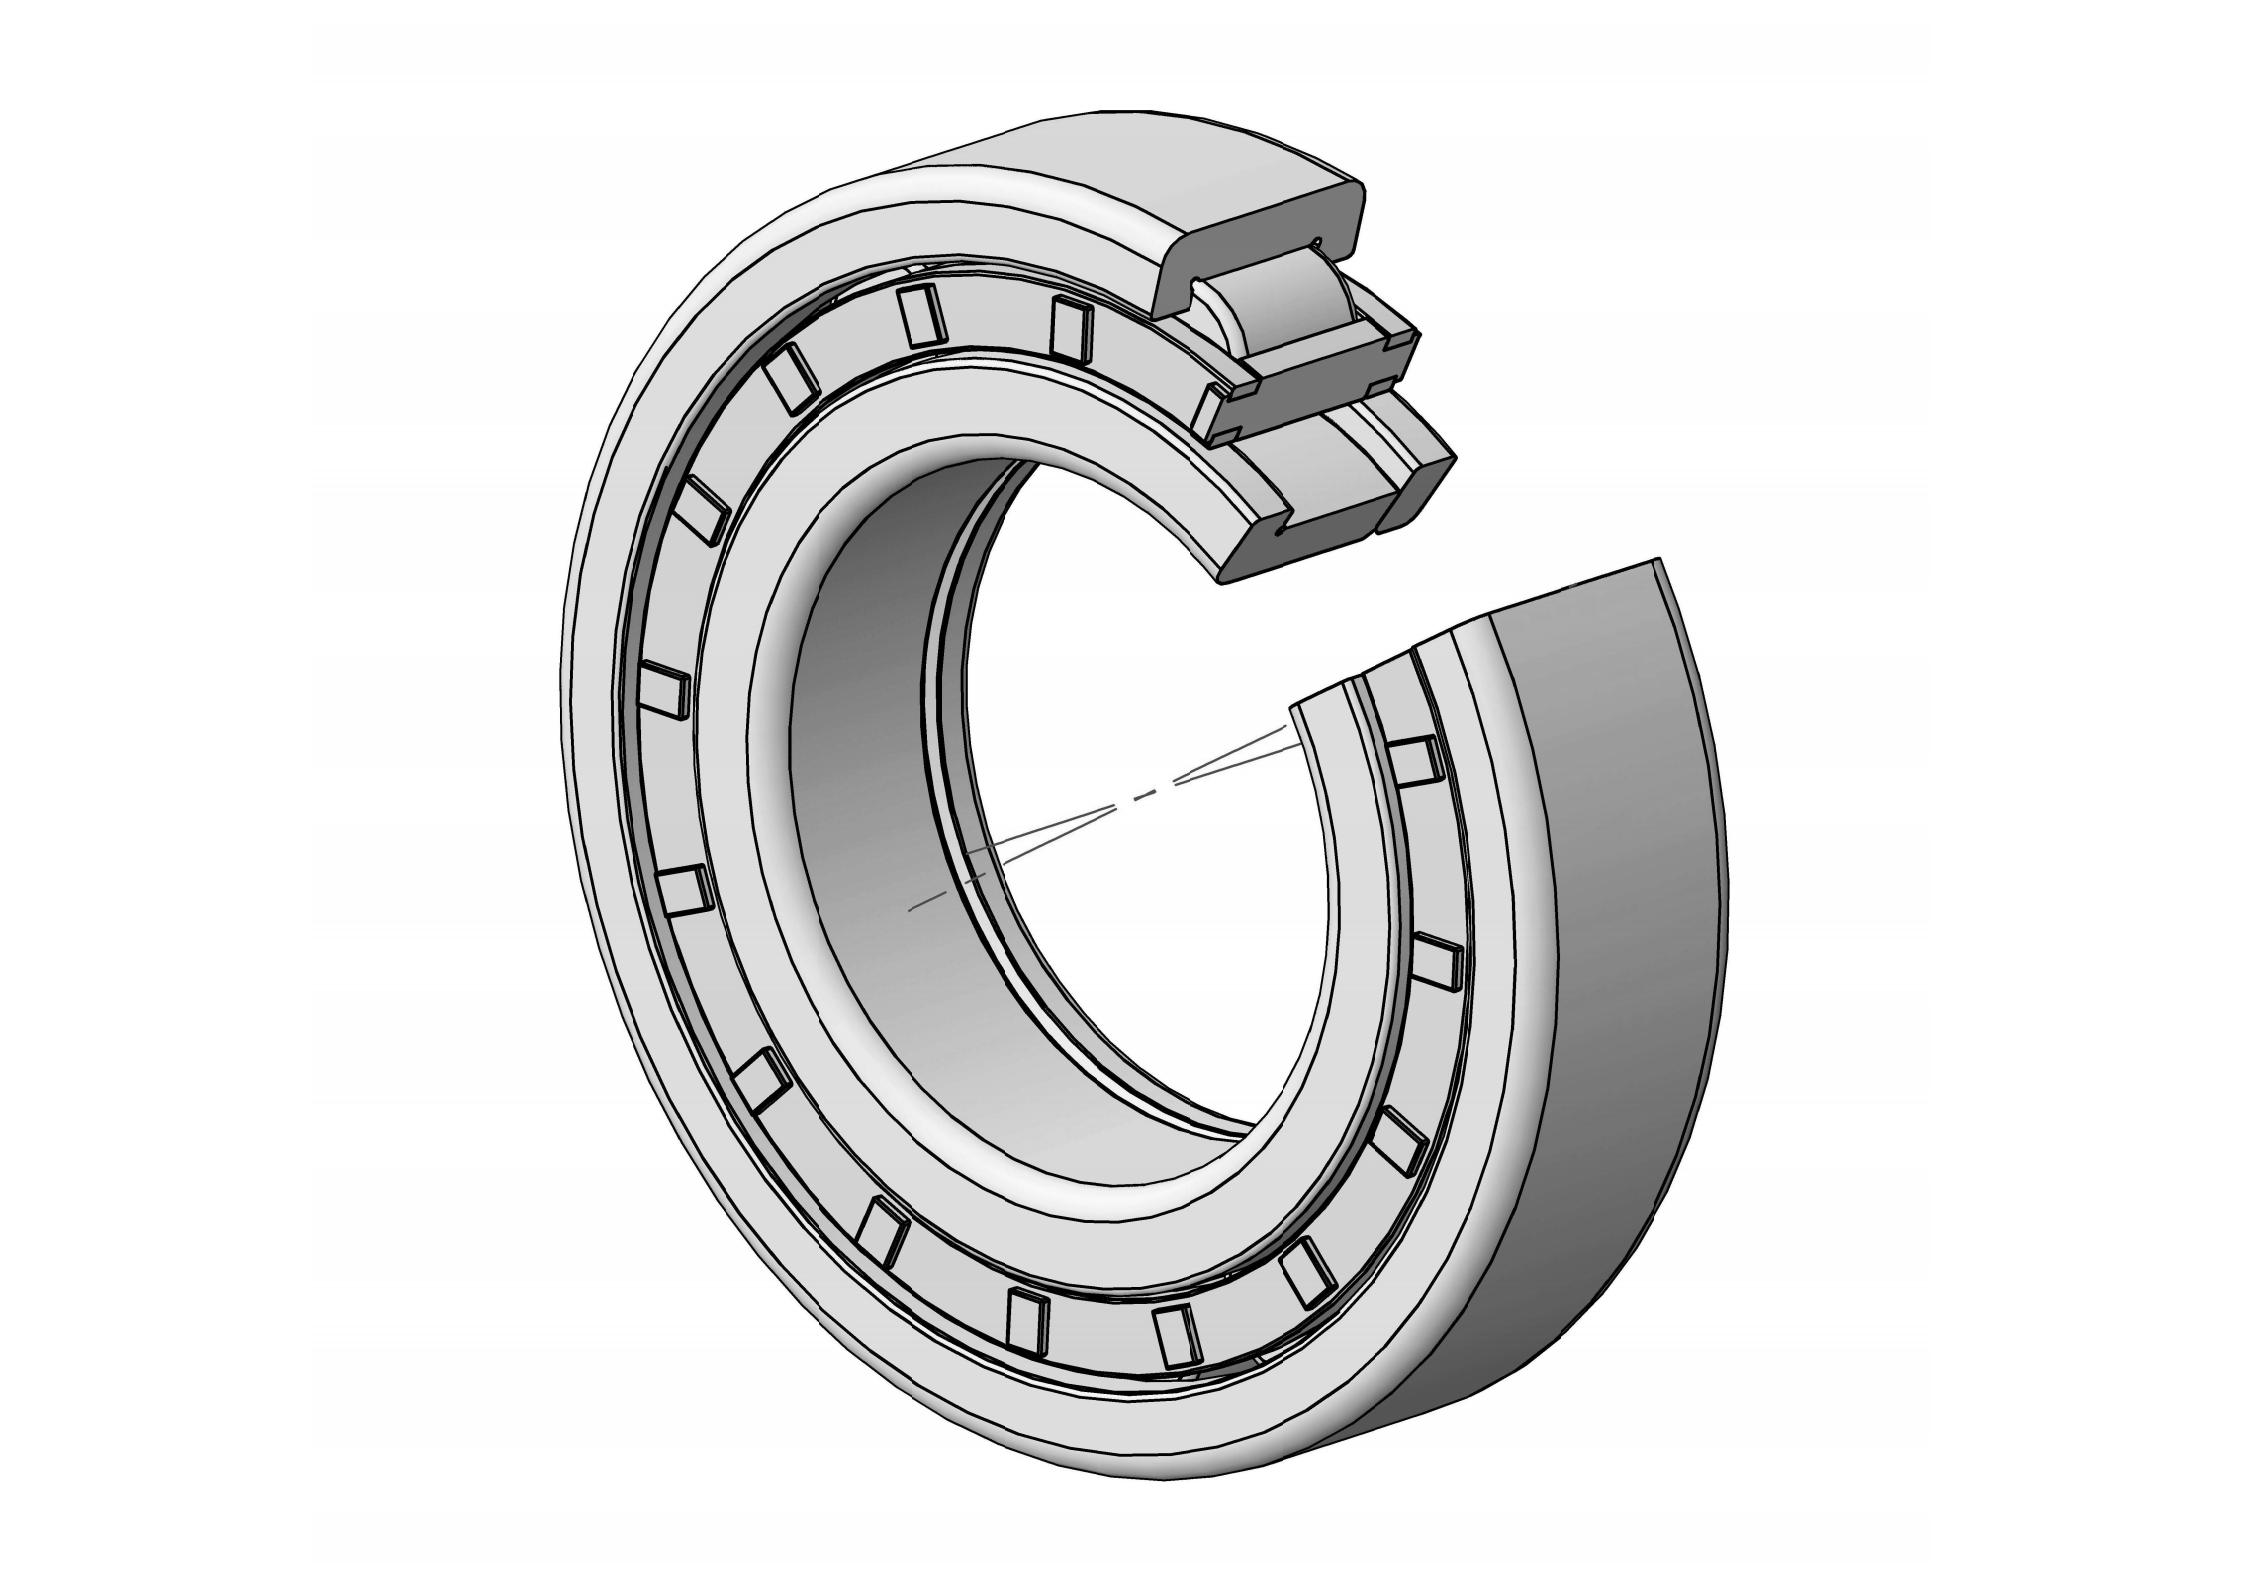 NUP2212-E Single Row Cylindrical roller bearing 